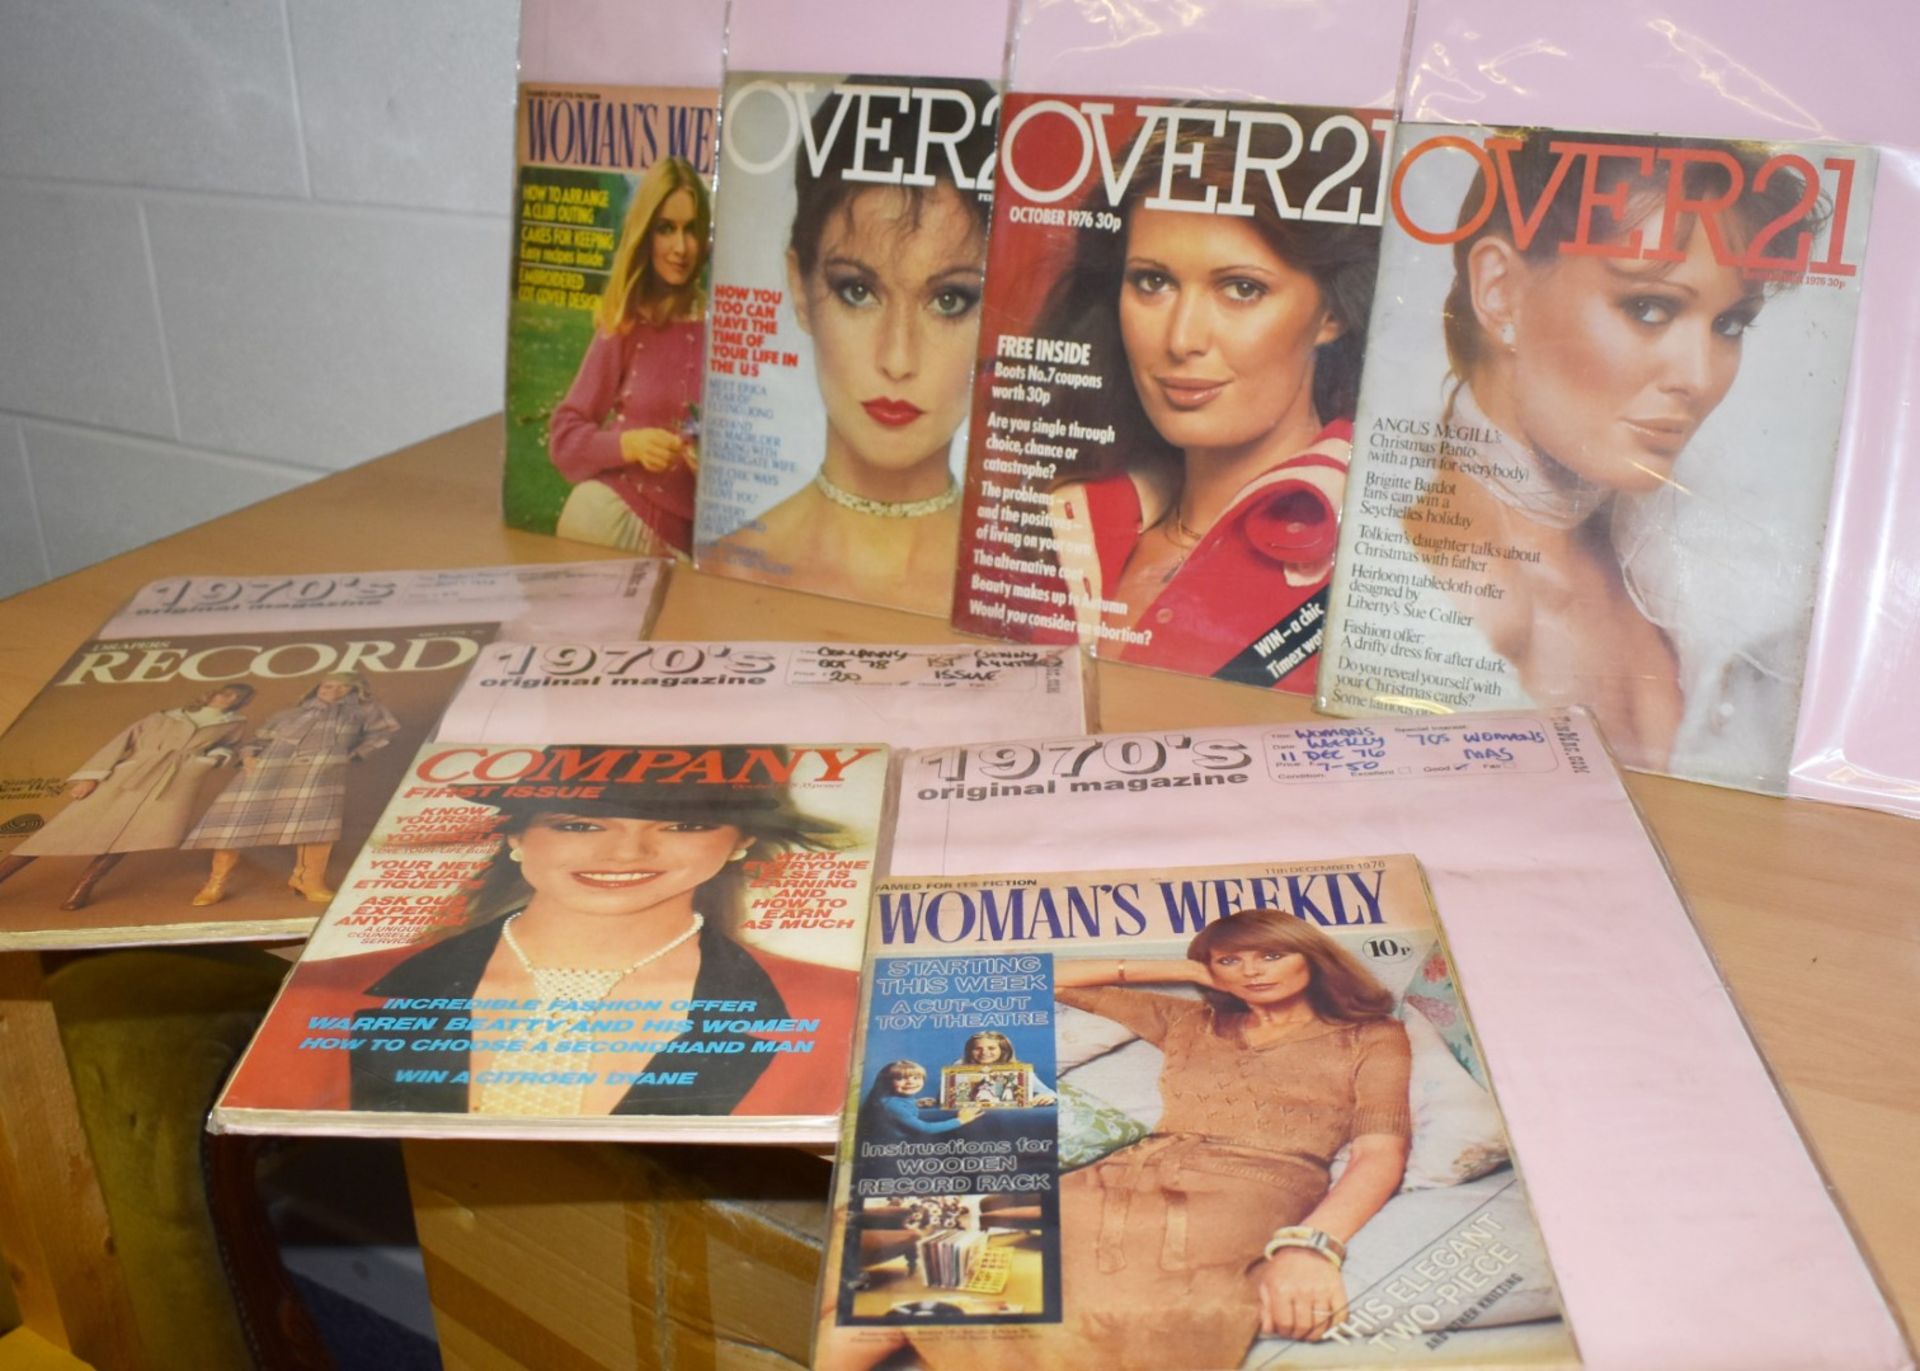 39 x Vintage Women's Fashion Magazines from the 1970's - Ref MB103 - Vogue, Women's Journal, Over21,